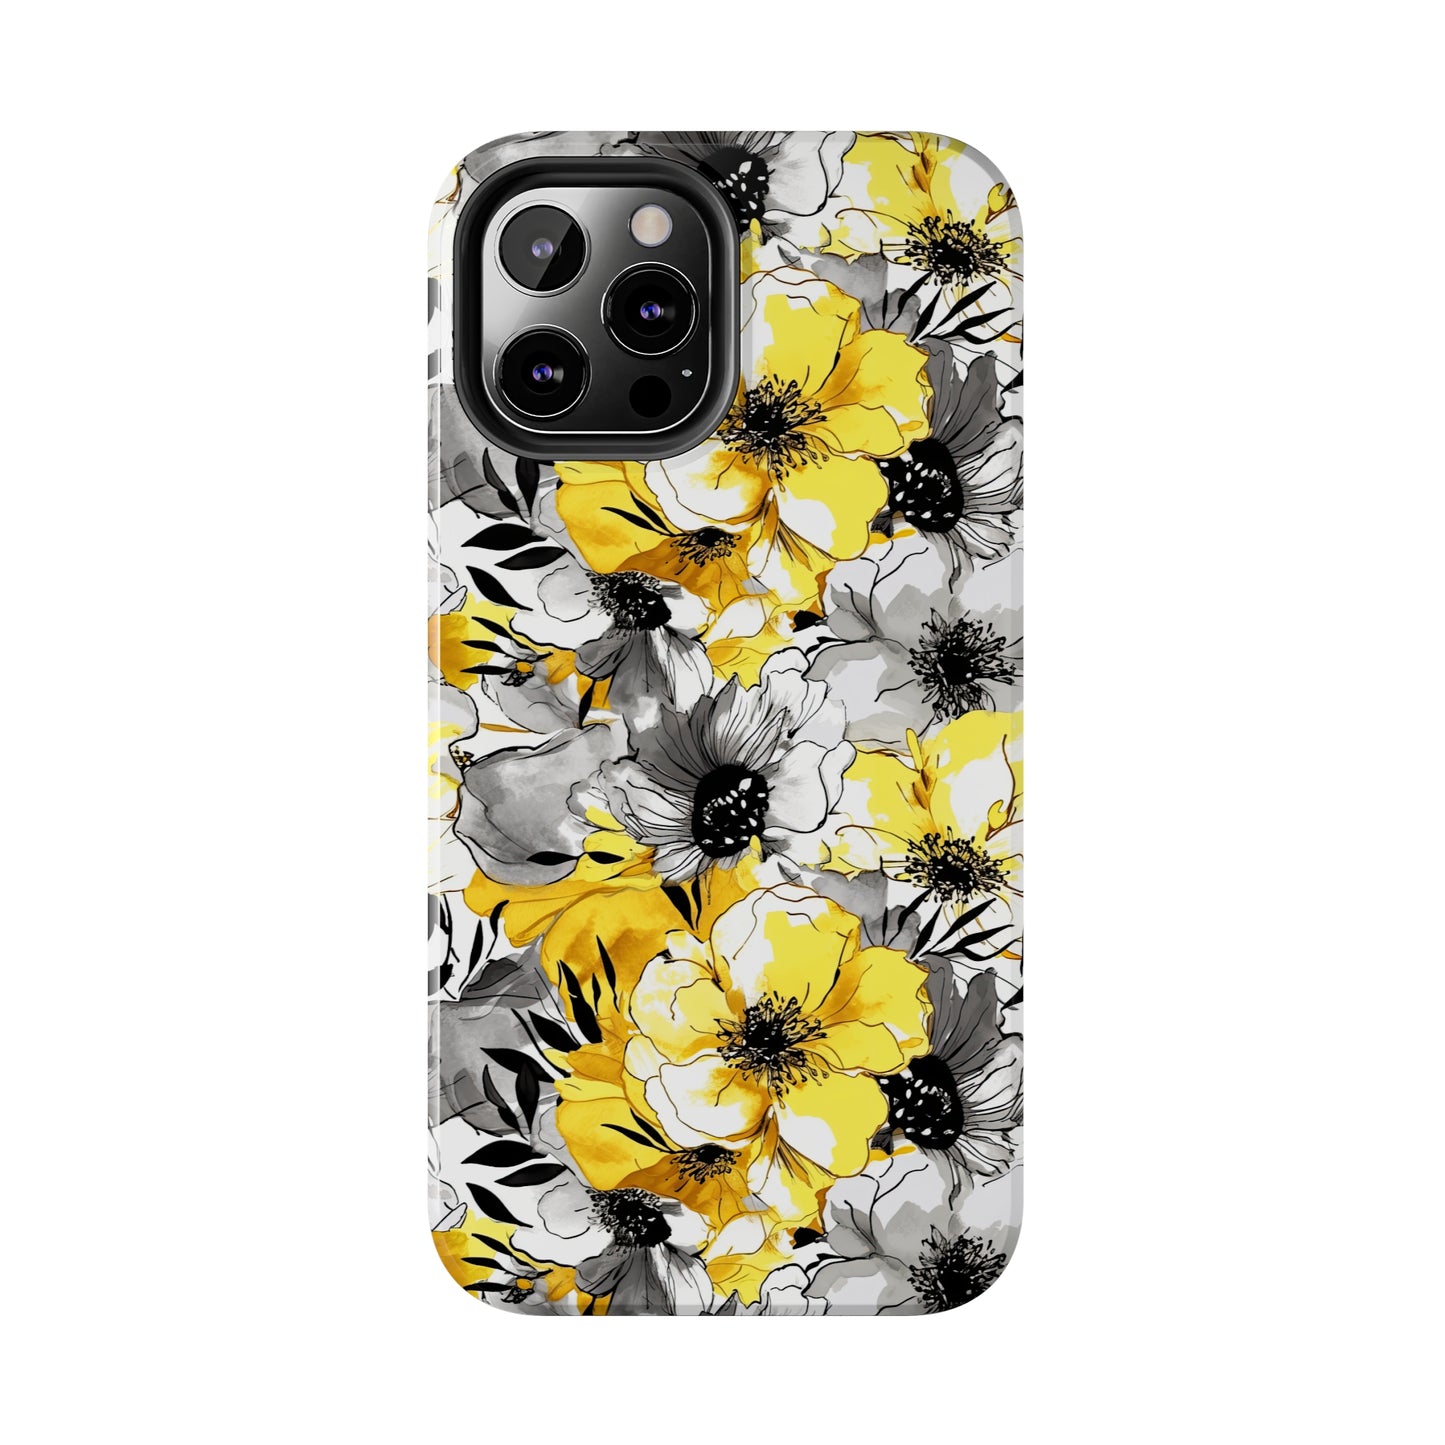 Soothing Radiance: Large Yellow and Grey Watercolor Flower Design Iphone Tough Phone Case